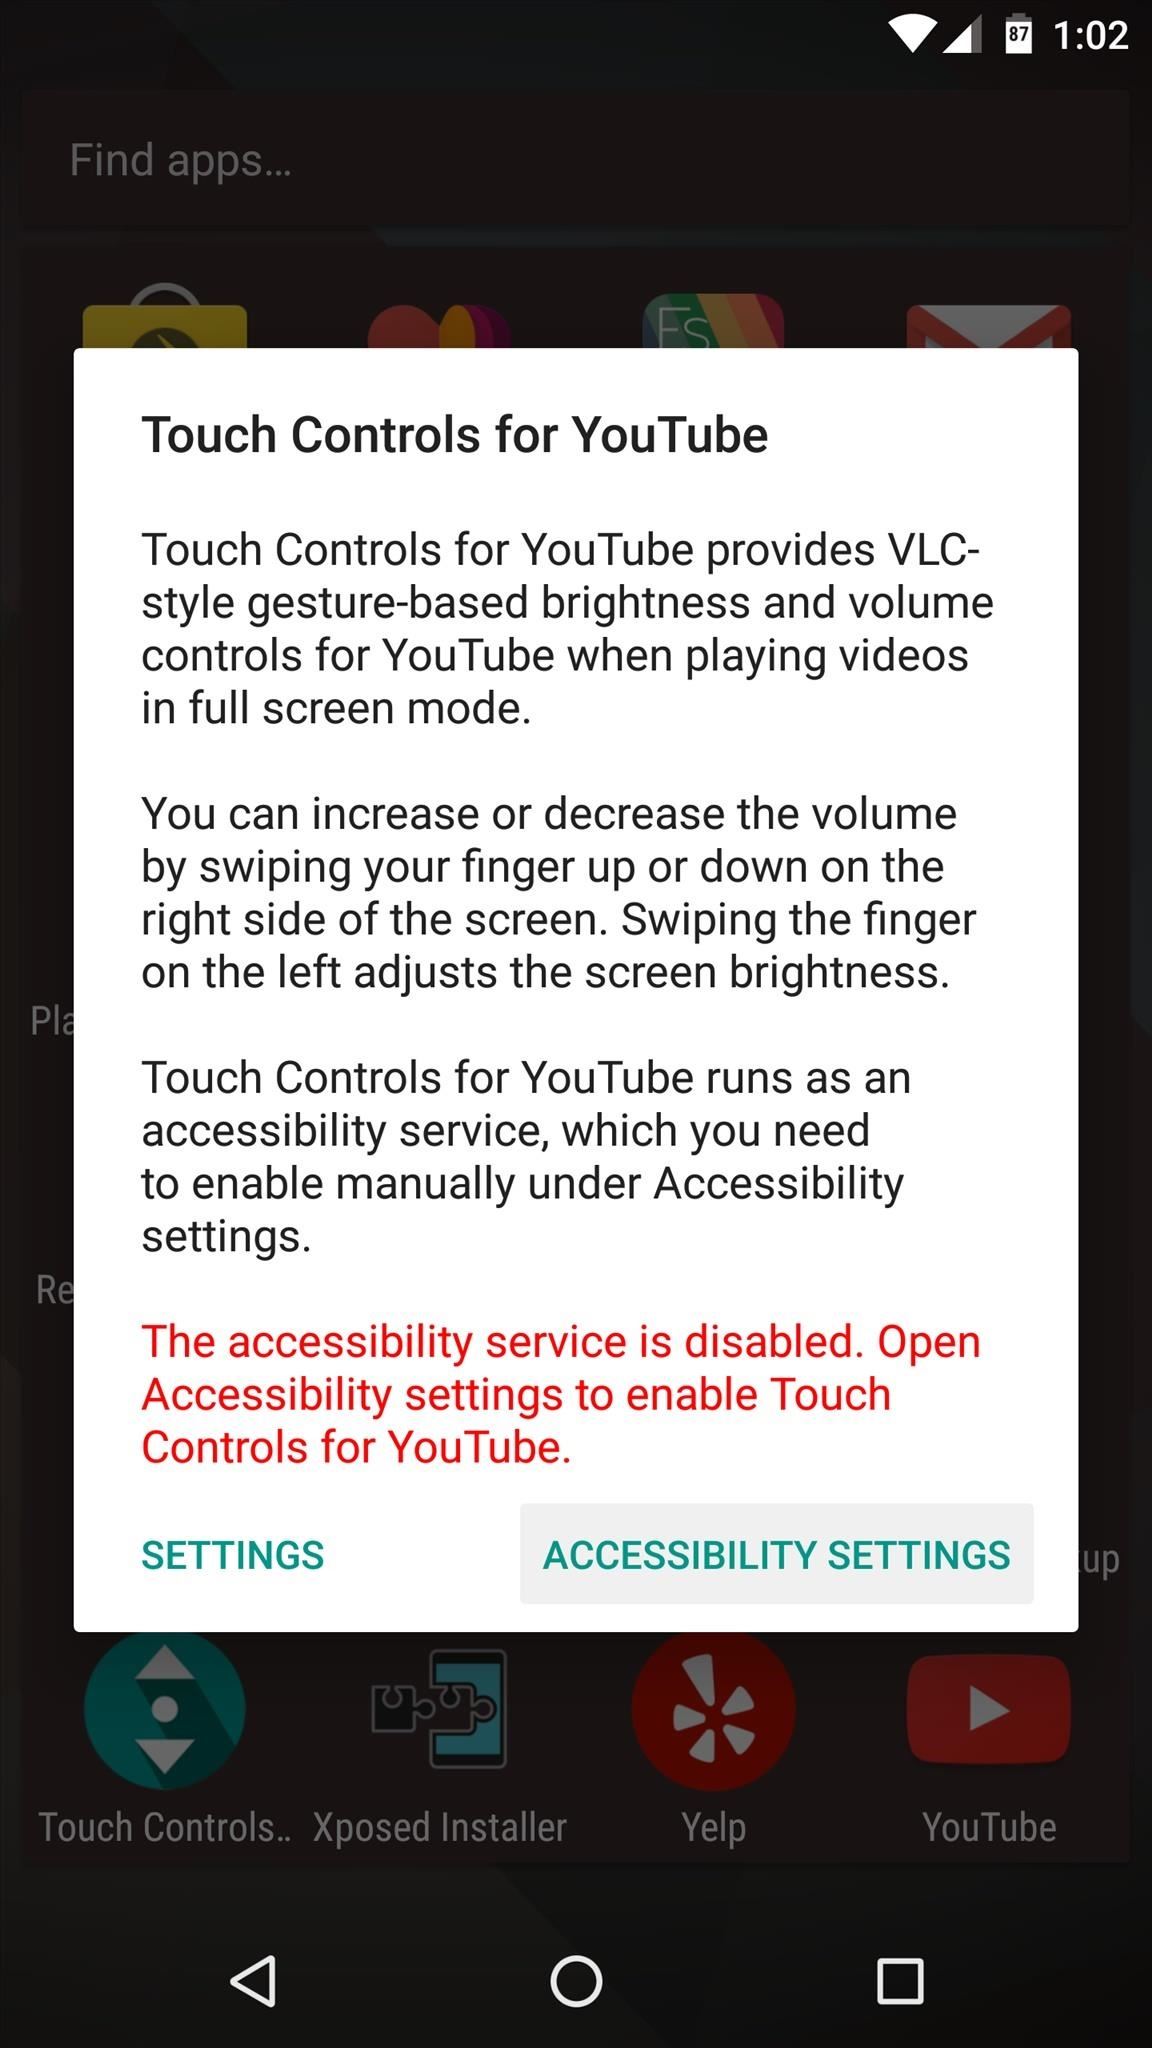 Get Sliding Gestures for Seamless Volume Control on YouTube